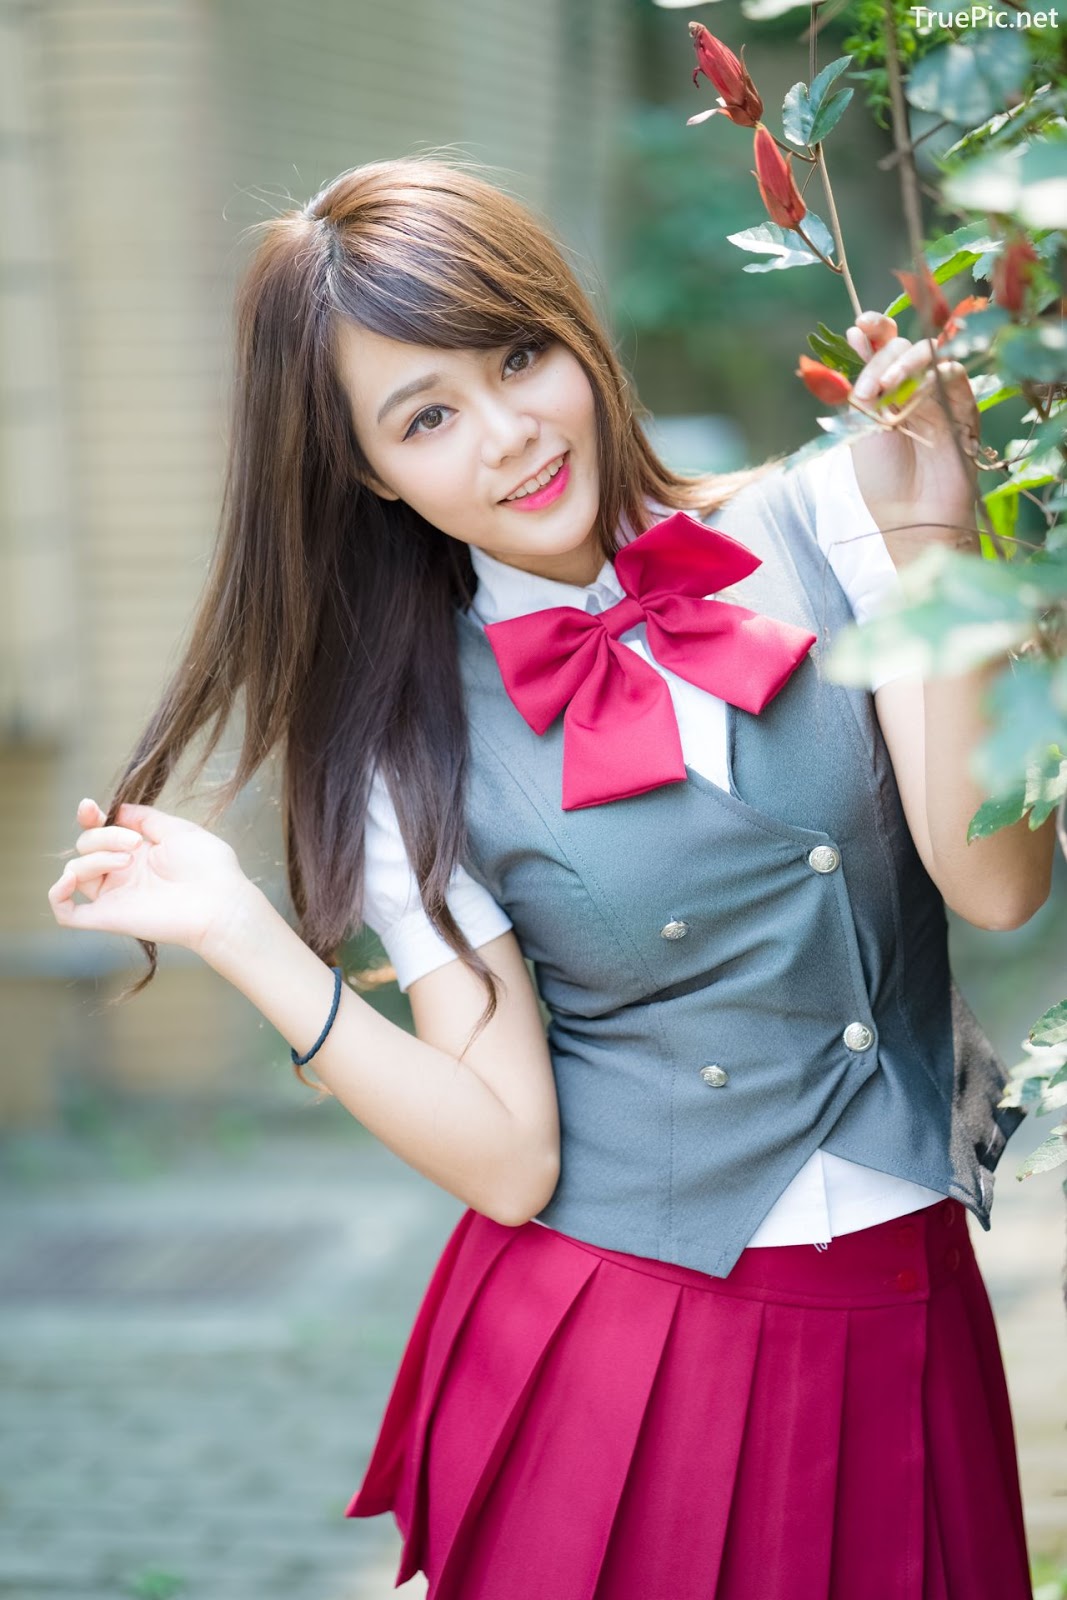 Image-Taiwan-Social-Celebrity-Sun-Hui-Tong-孫卉彤-A-Day-as-Student-Girl-TruePic.net- Picture-122